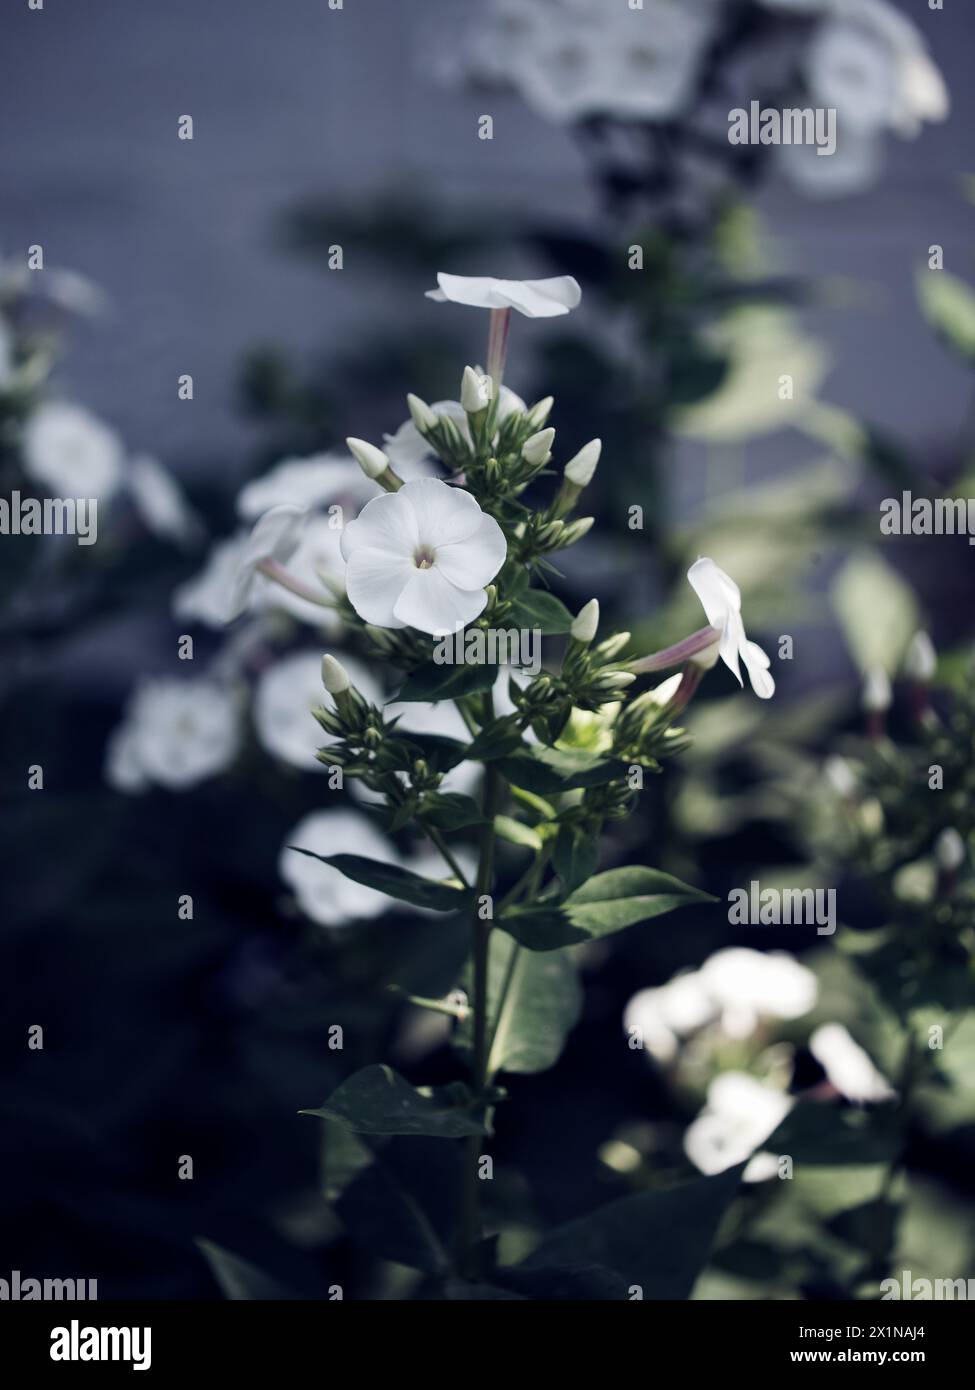 Blooming white flowers with distinct petal shapes are highlighted against the contrasting dark green leaves. Stock Photo